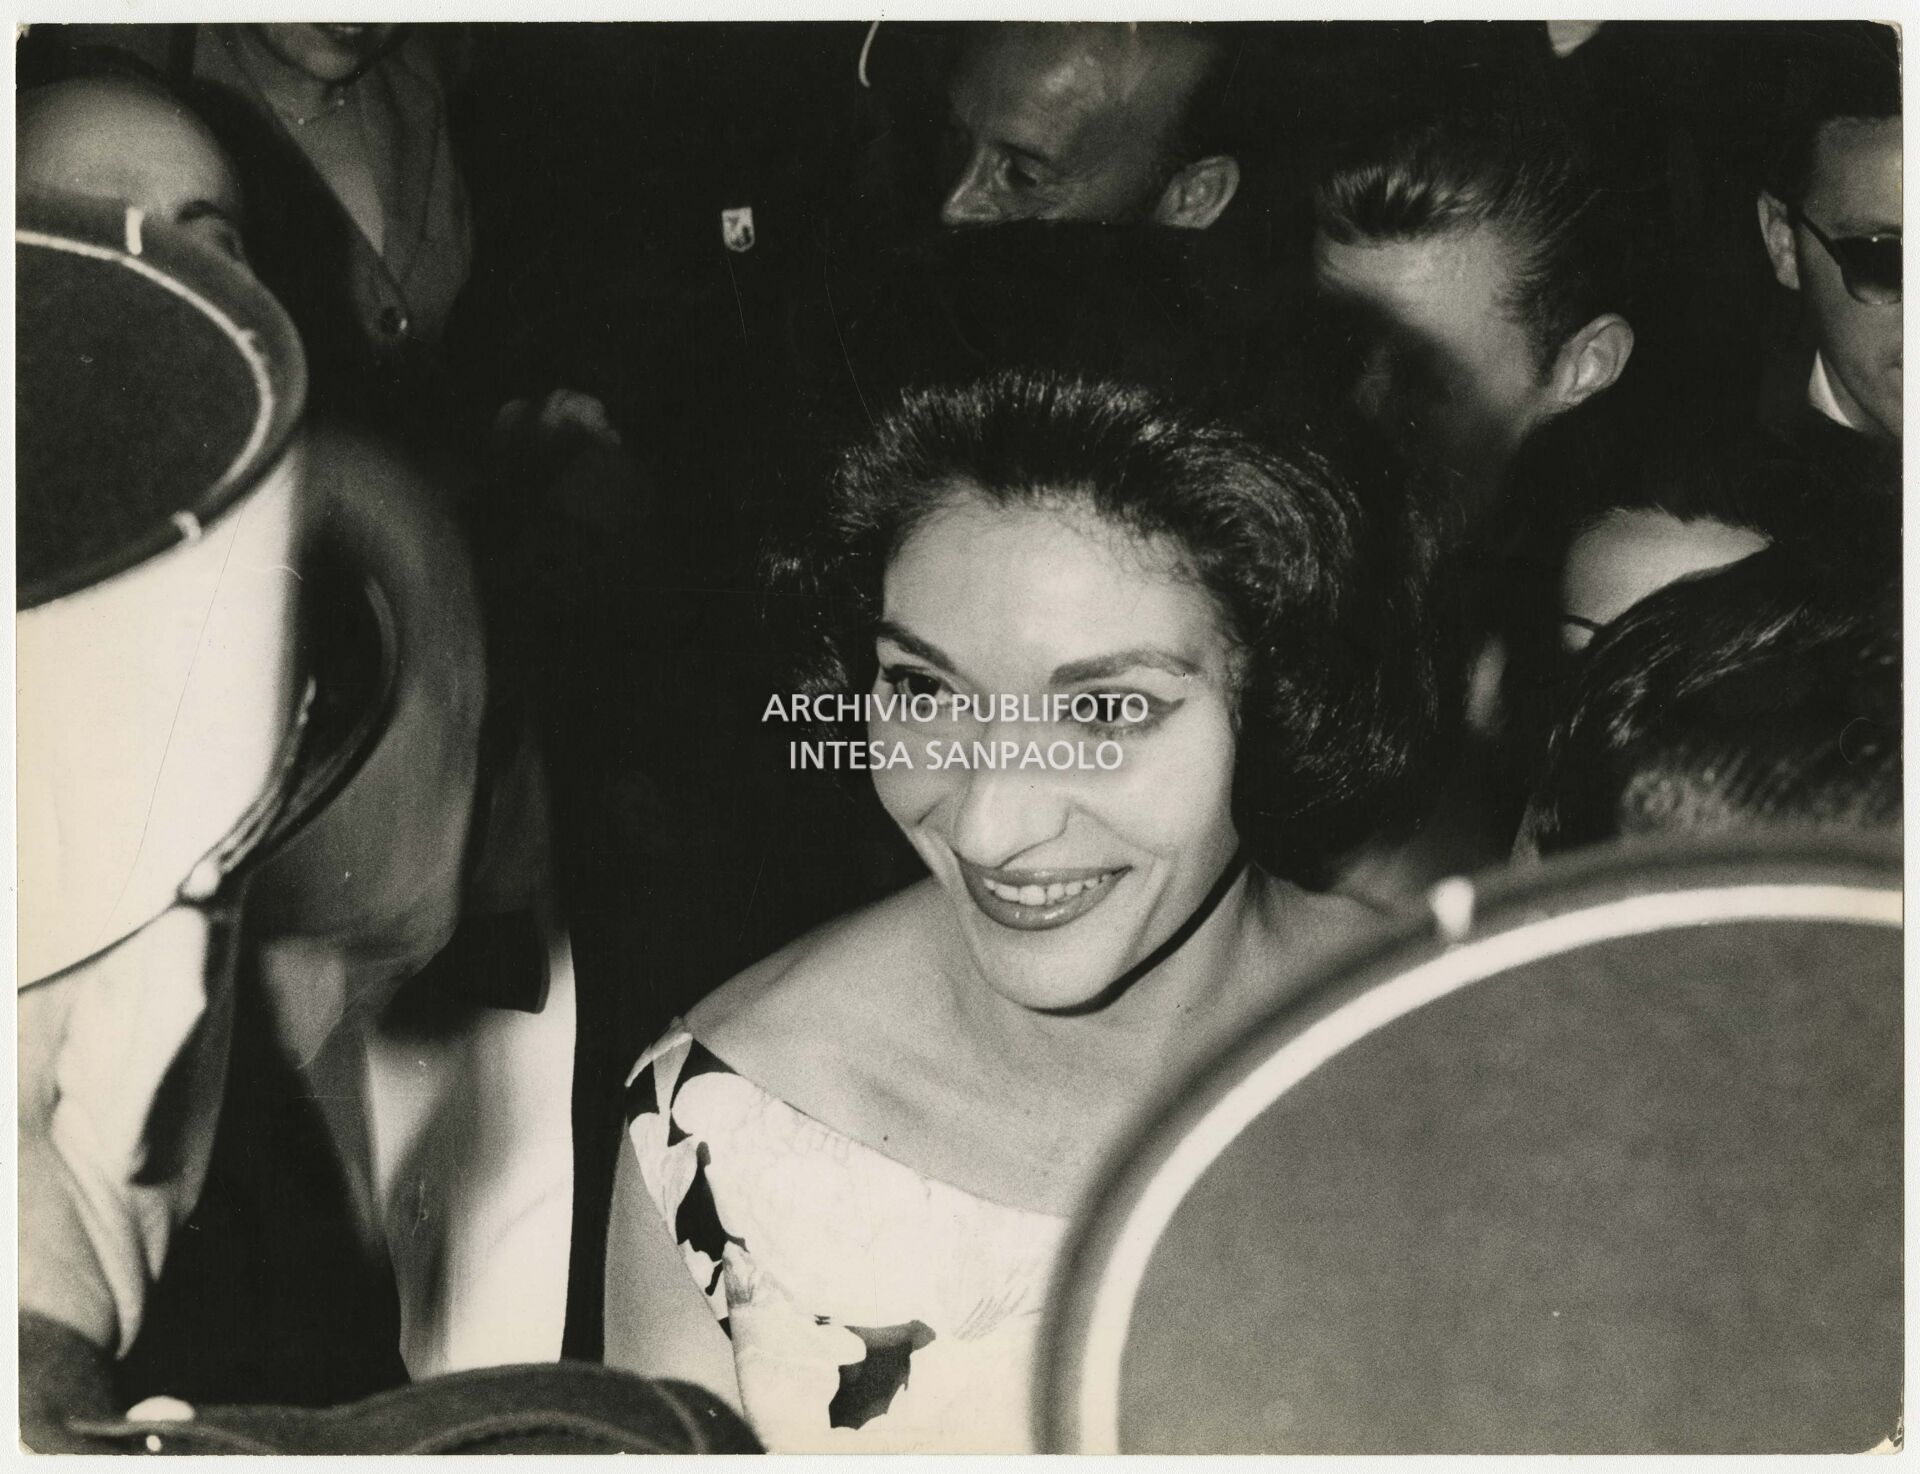 Maria Callas surrounded by the crowd at the Cannes Film Festival